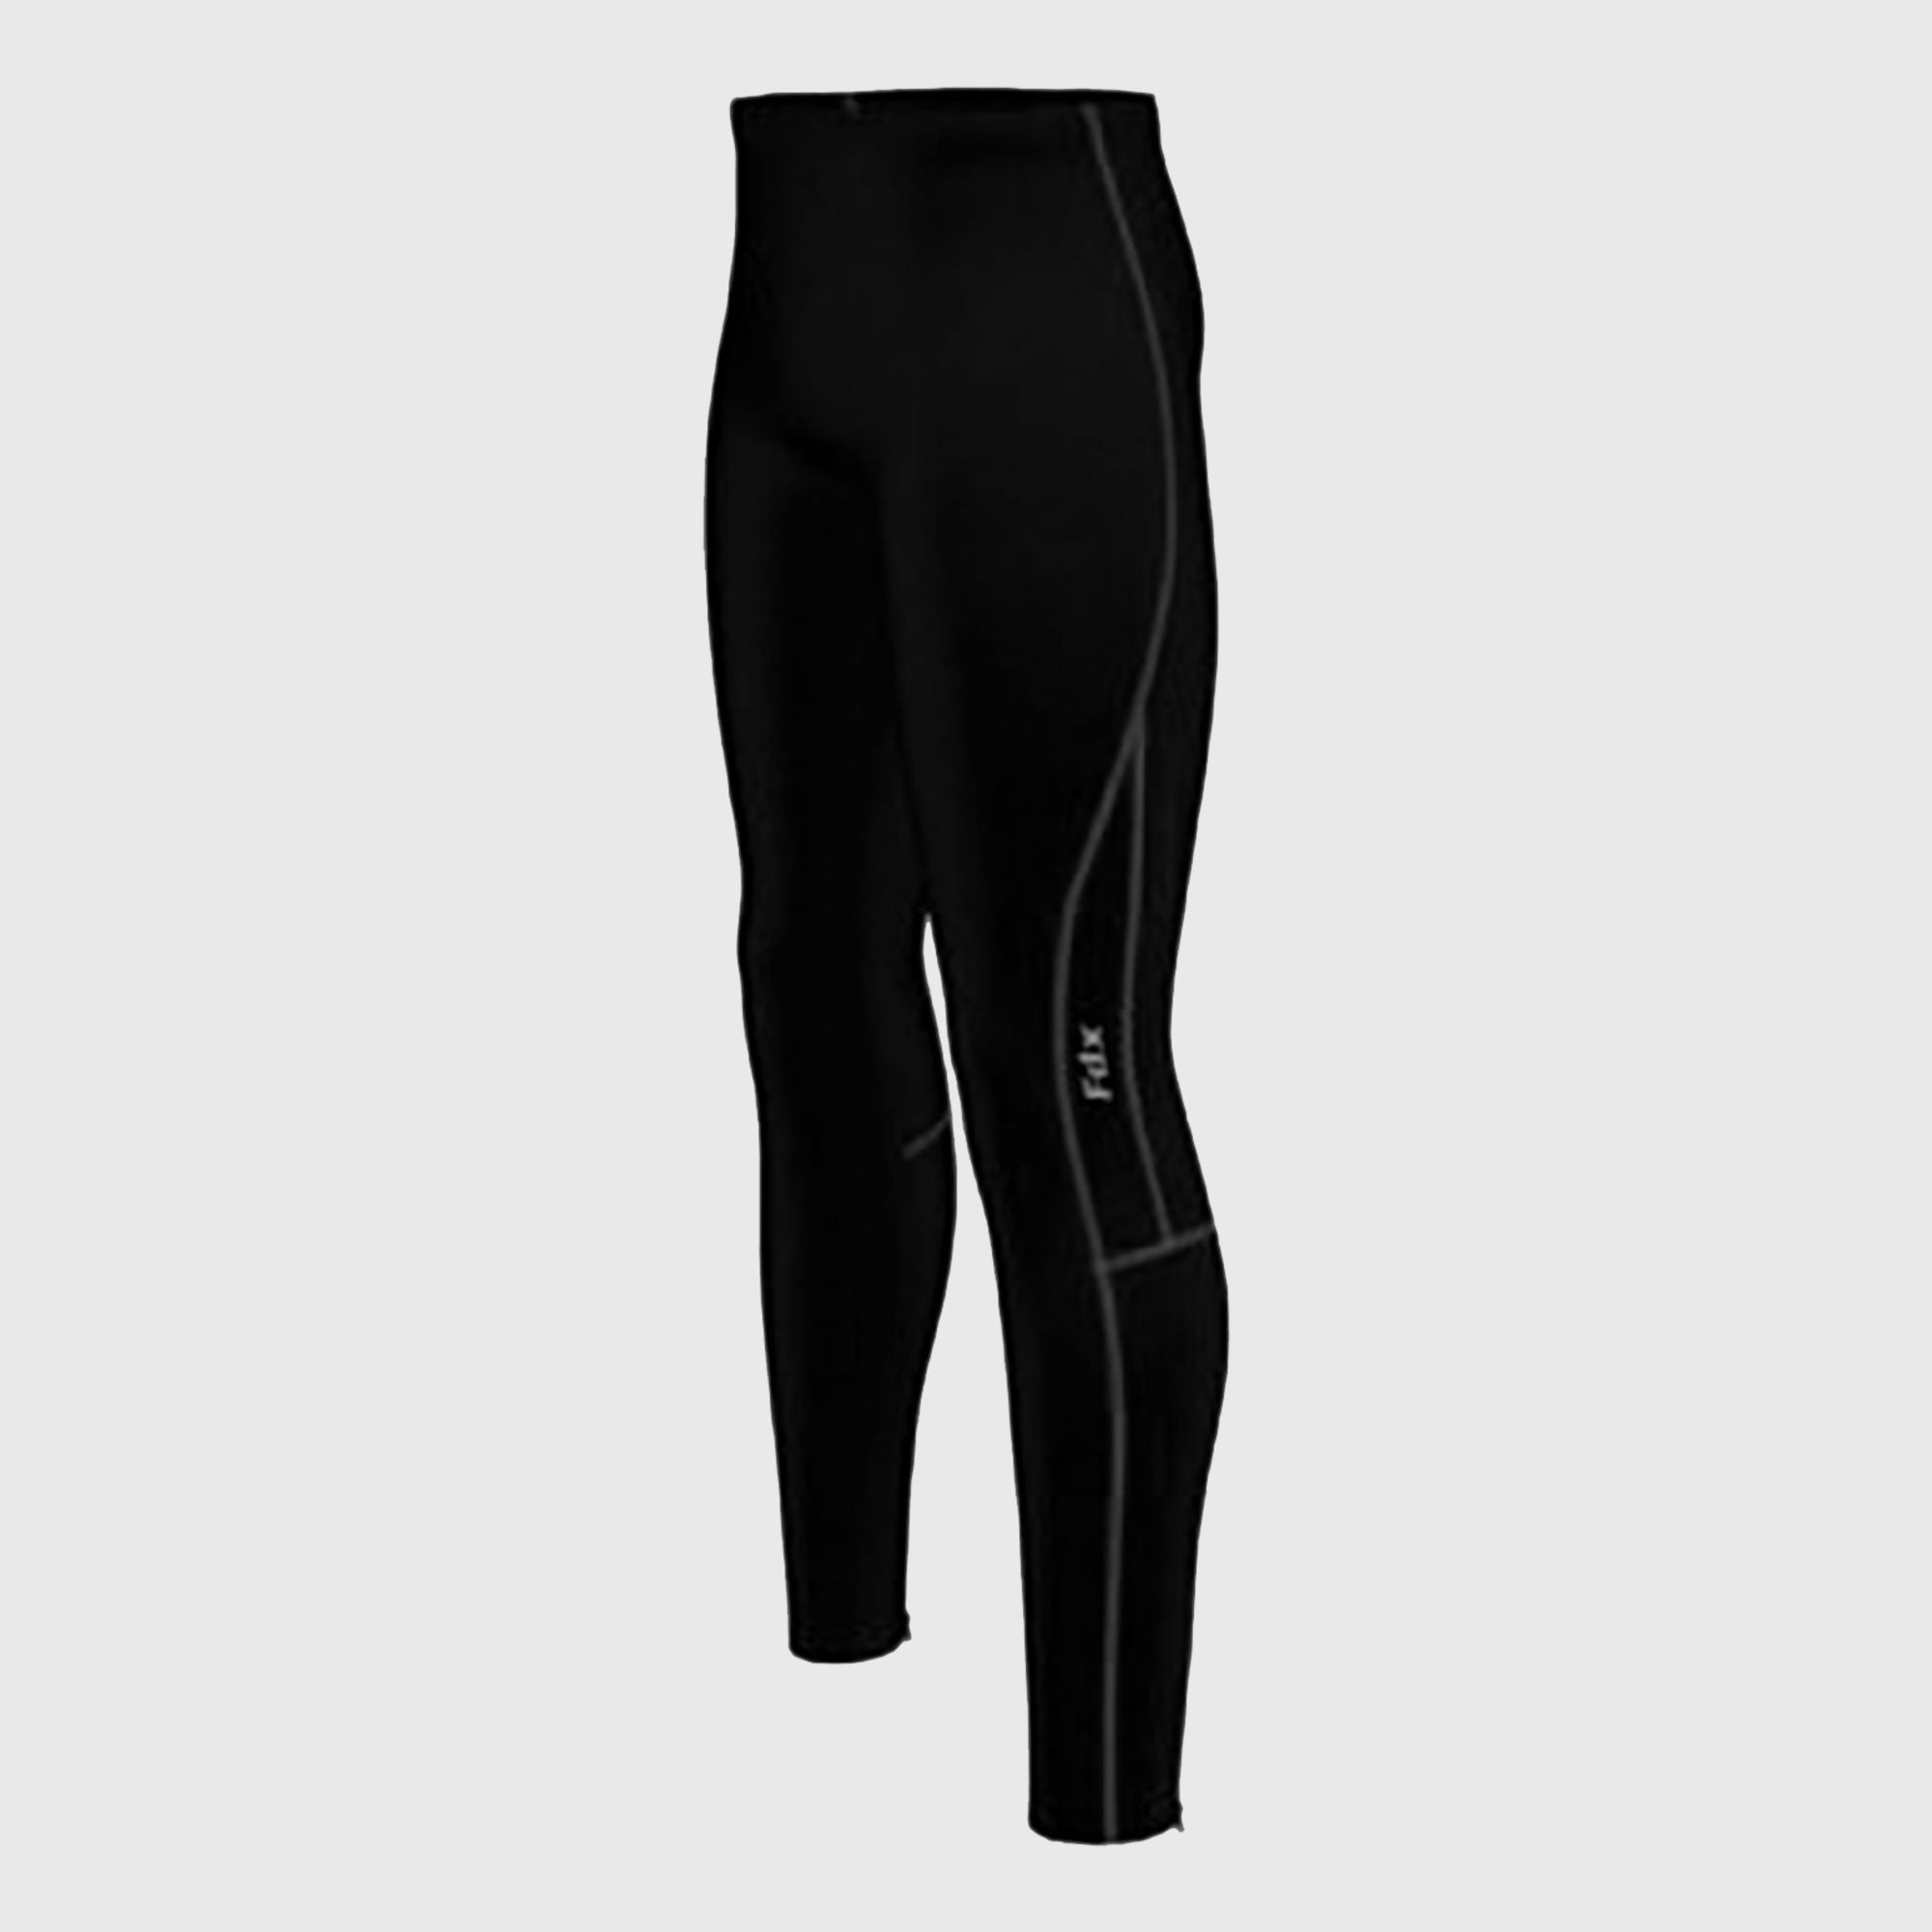 Fdx Heatchaser Men's Compression Winter Cycling Tights Black, Red